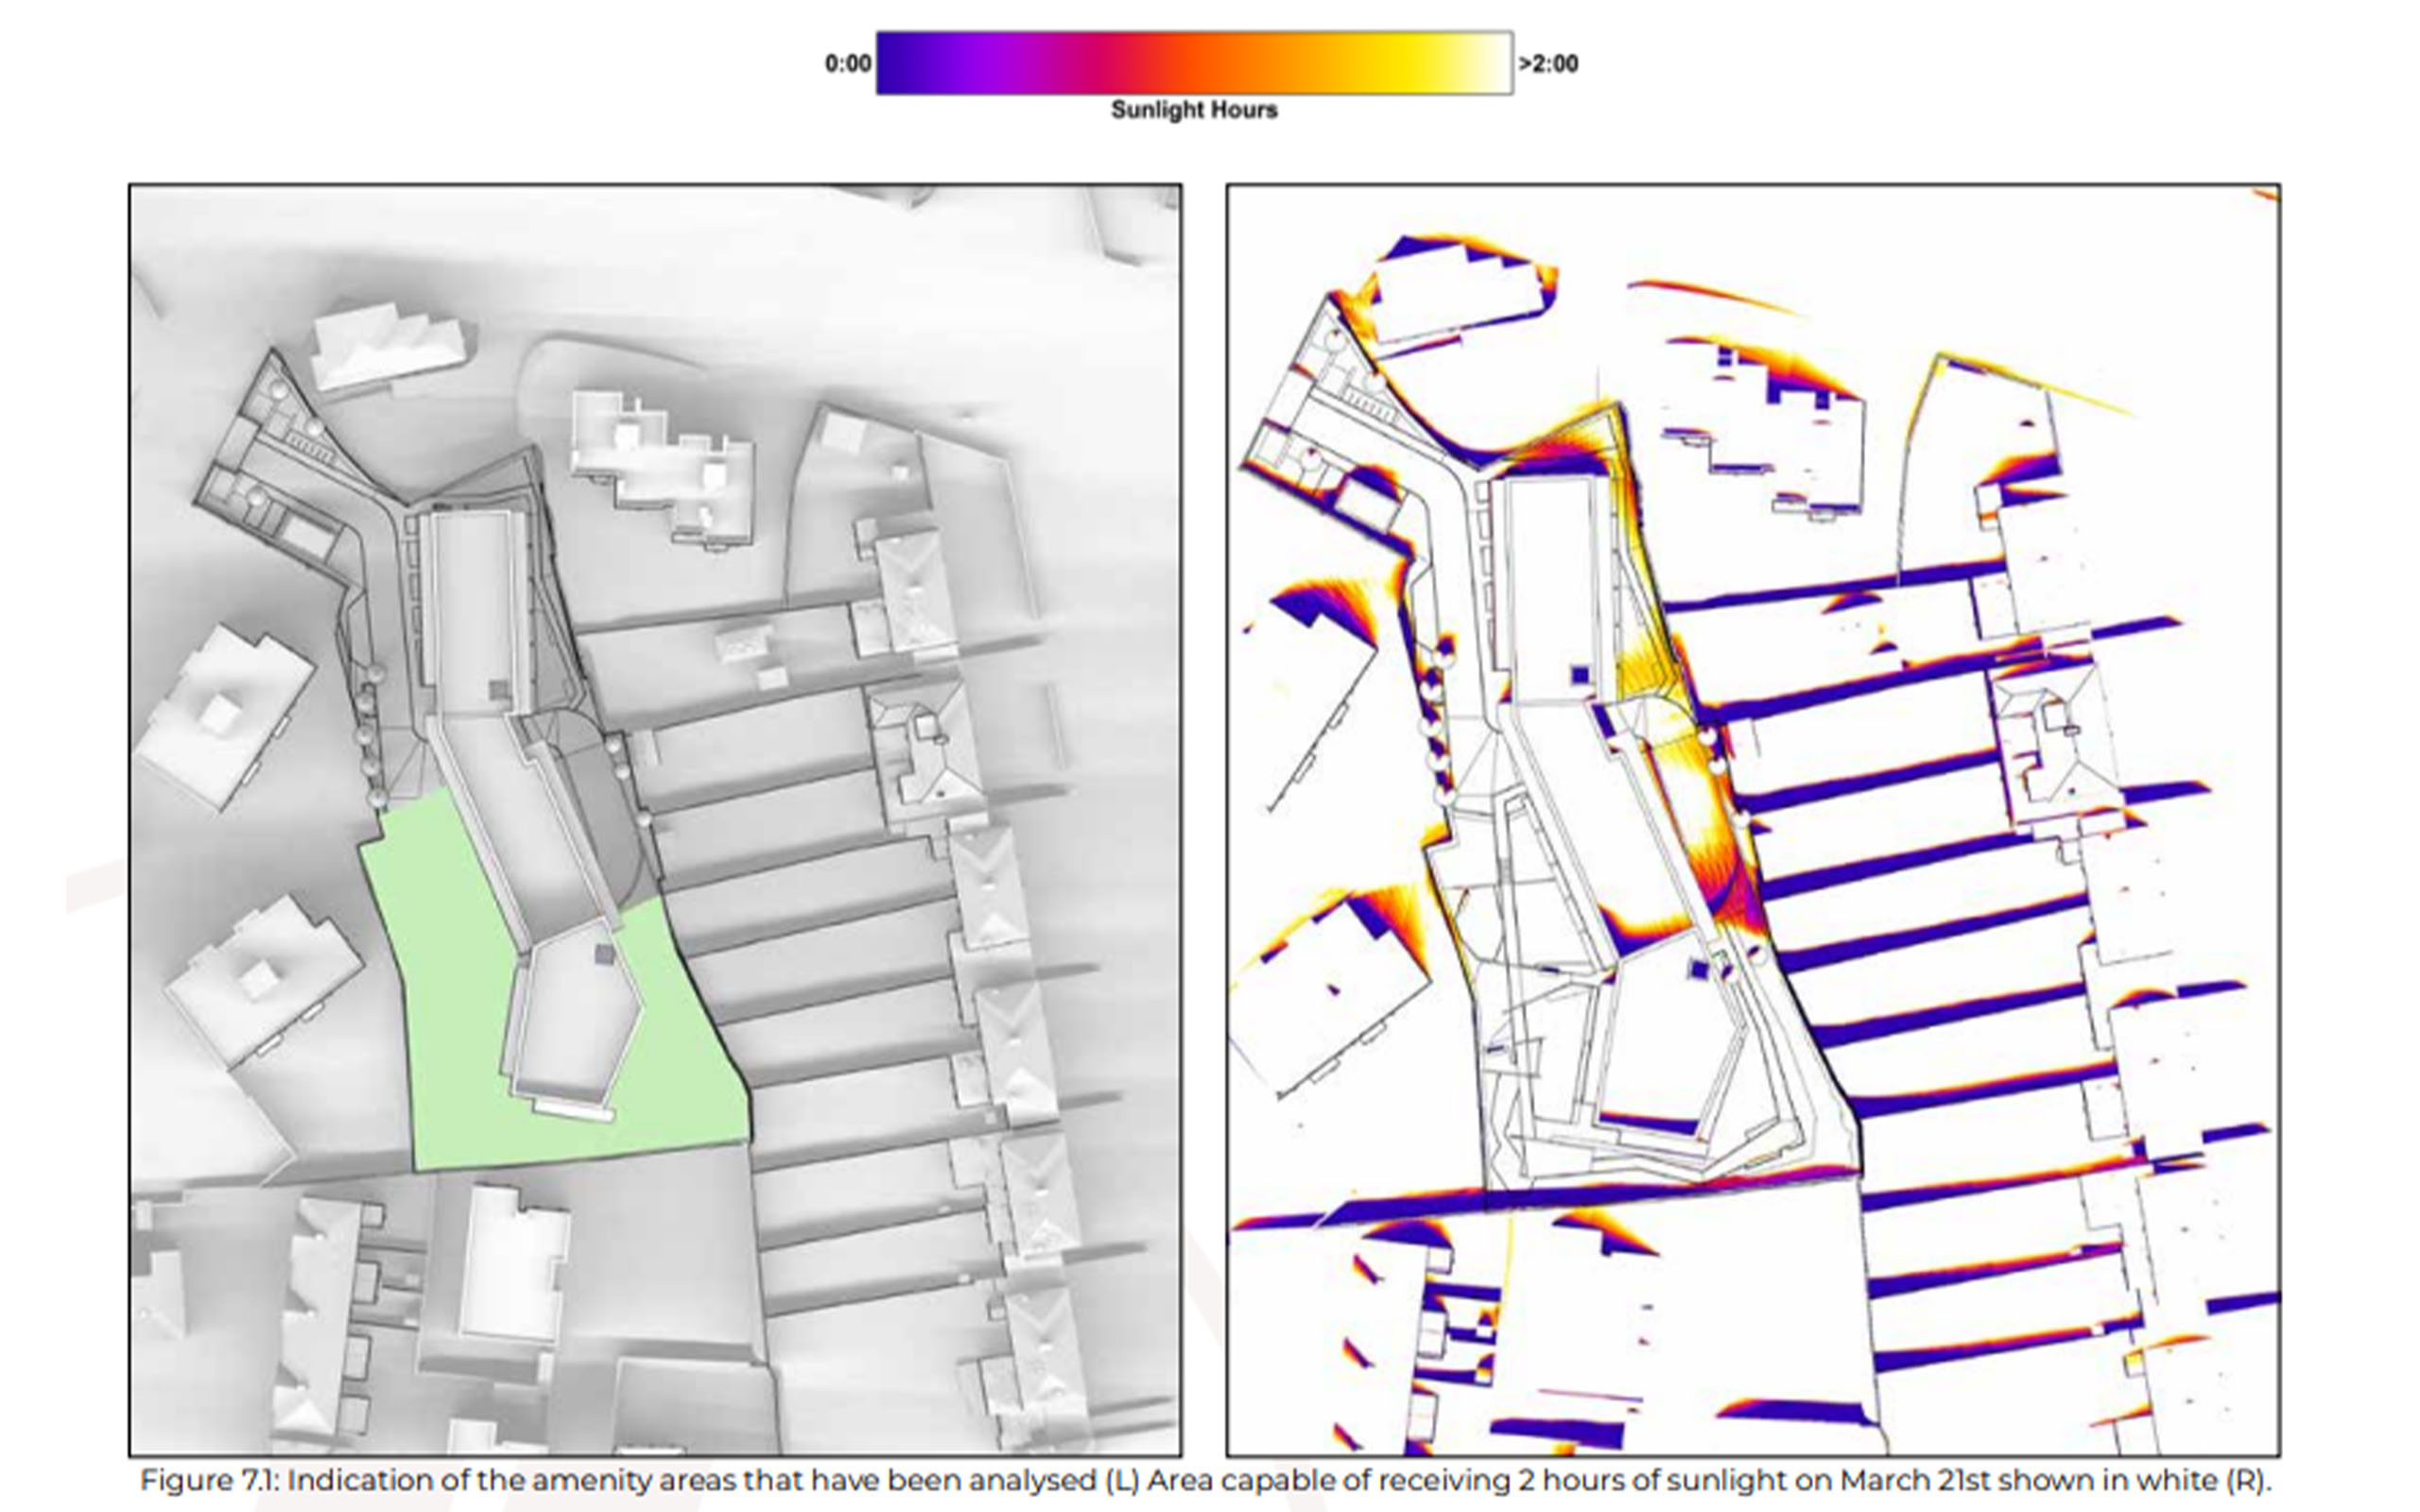 Sunlight Assessment of Amenity Areas for 52 Apartments at Glenavon House, Glasnevin, Dublin 9.